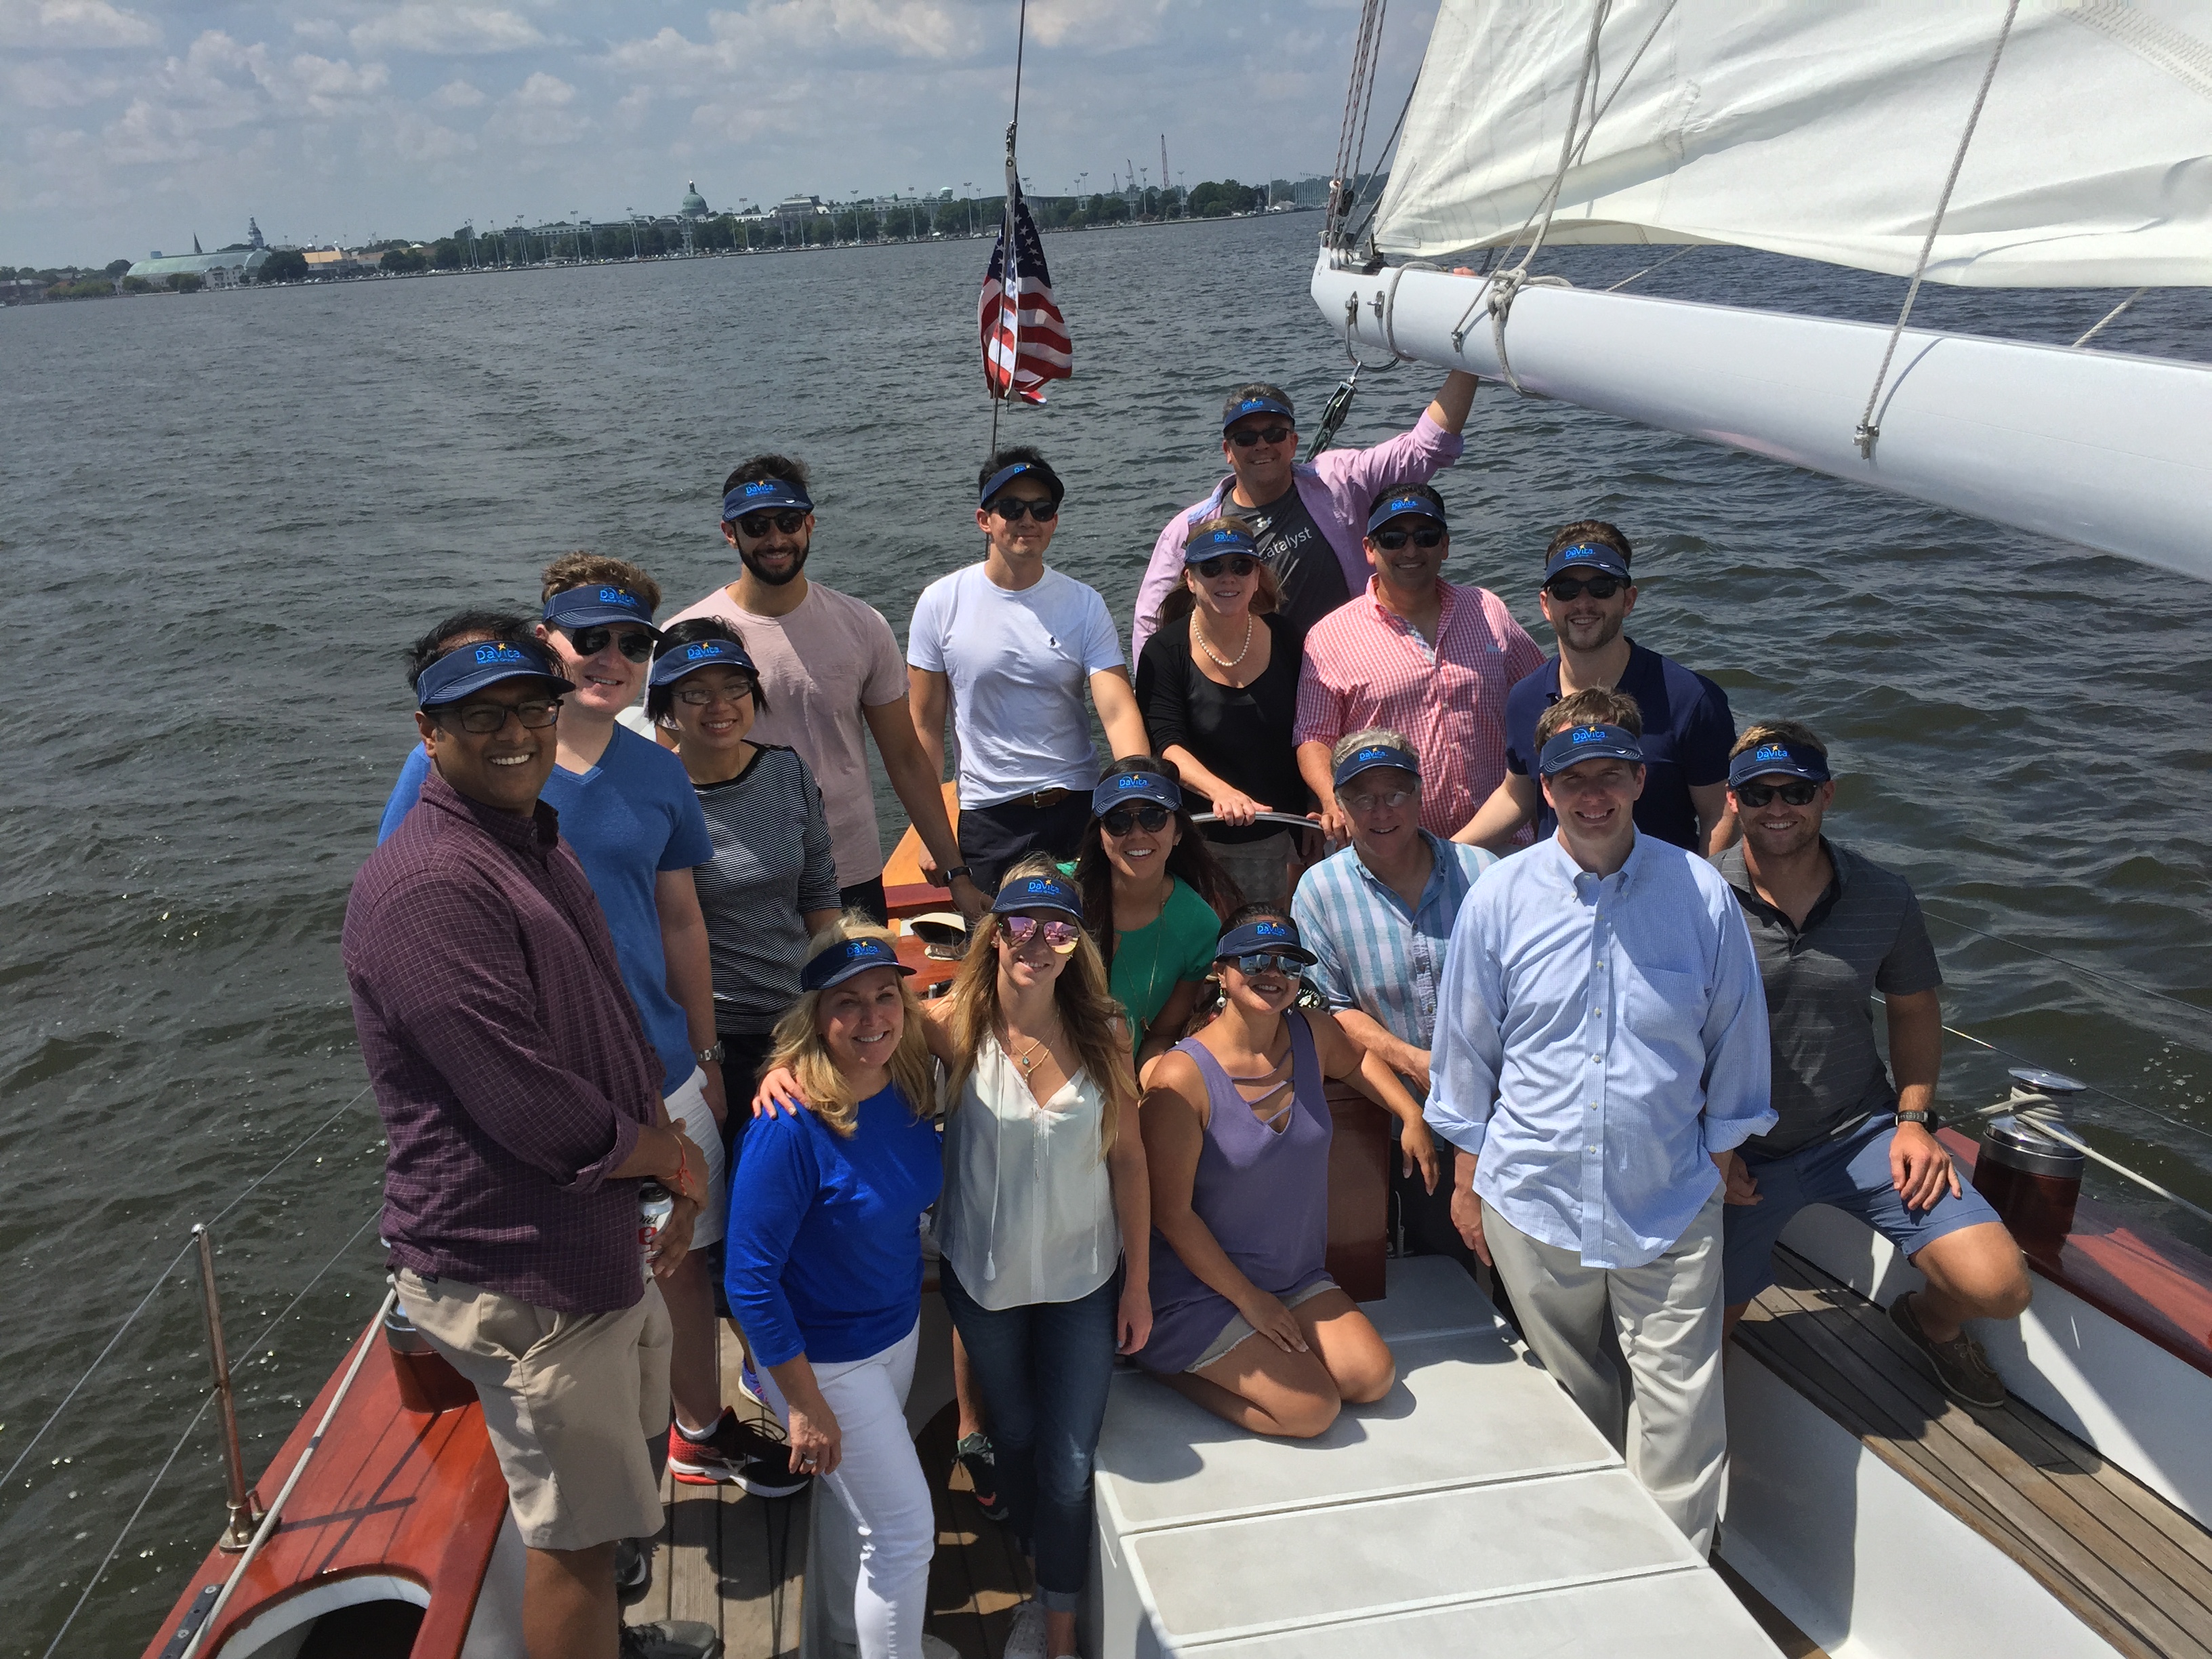 Company outing picture all have on black visors with blue print